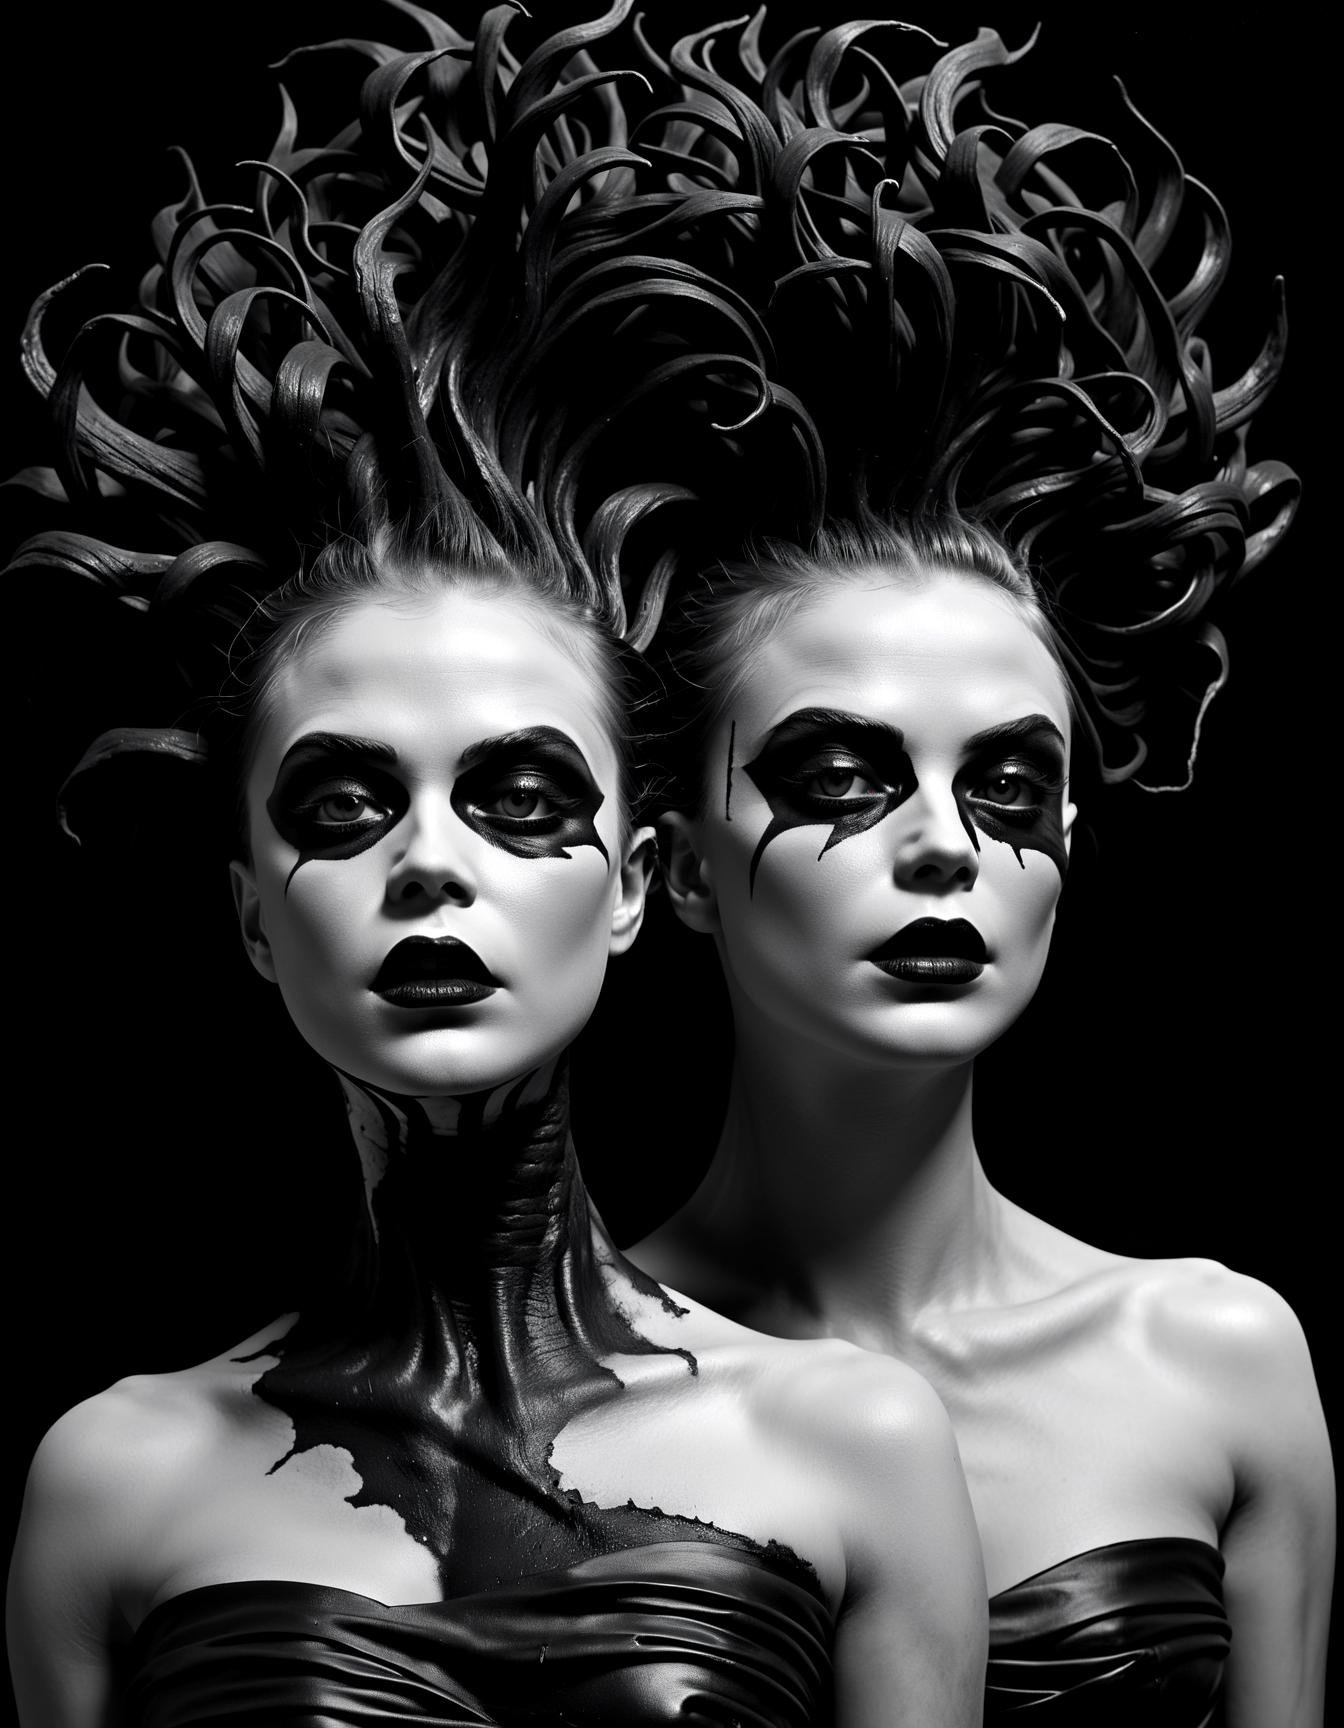 monochrome photography portrait Distorted bodies, twisted fashion, nightmare-inspired makeup, unsettling haute couture, fashion straight from the darkest dreams, Creepy Chic Magazine, surreal nightmare landscape.,detailed, (c1bo:1.05), (black and white:1.15),in (halsman:1.05) style,